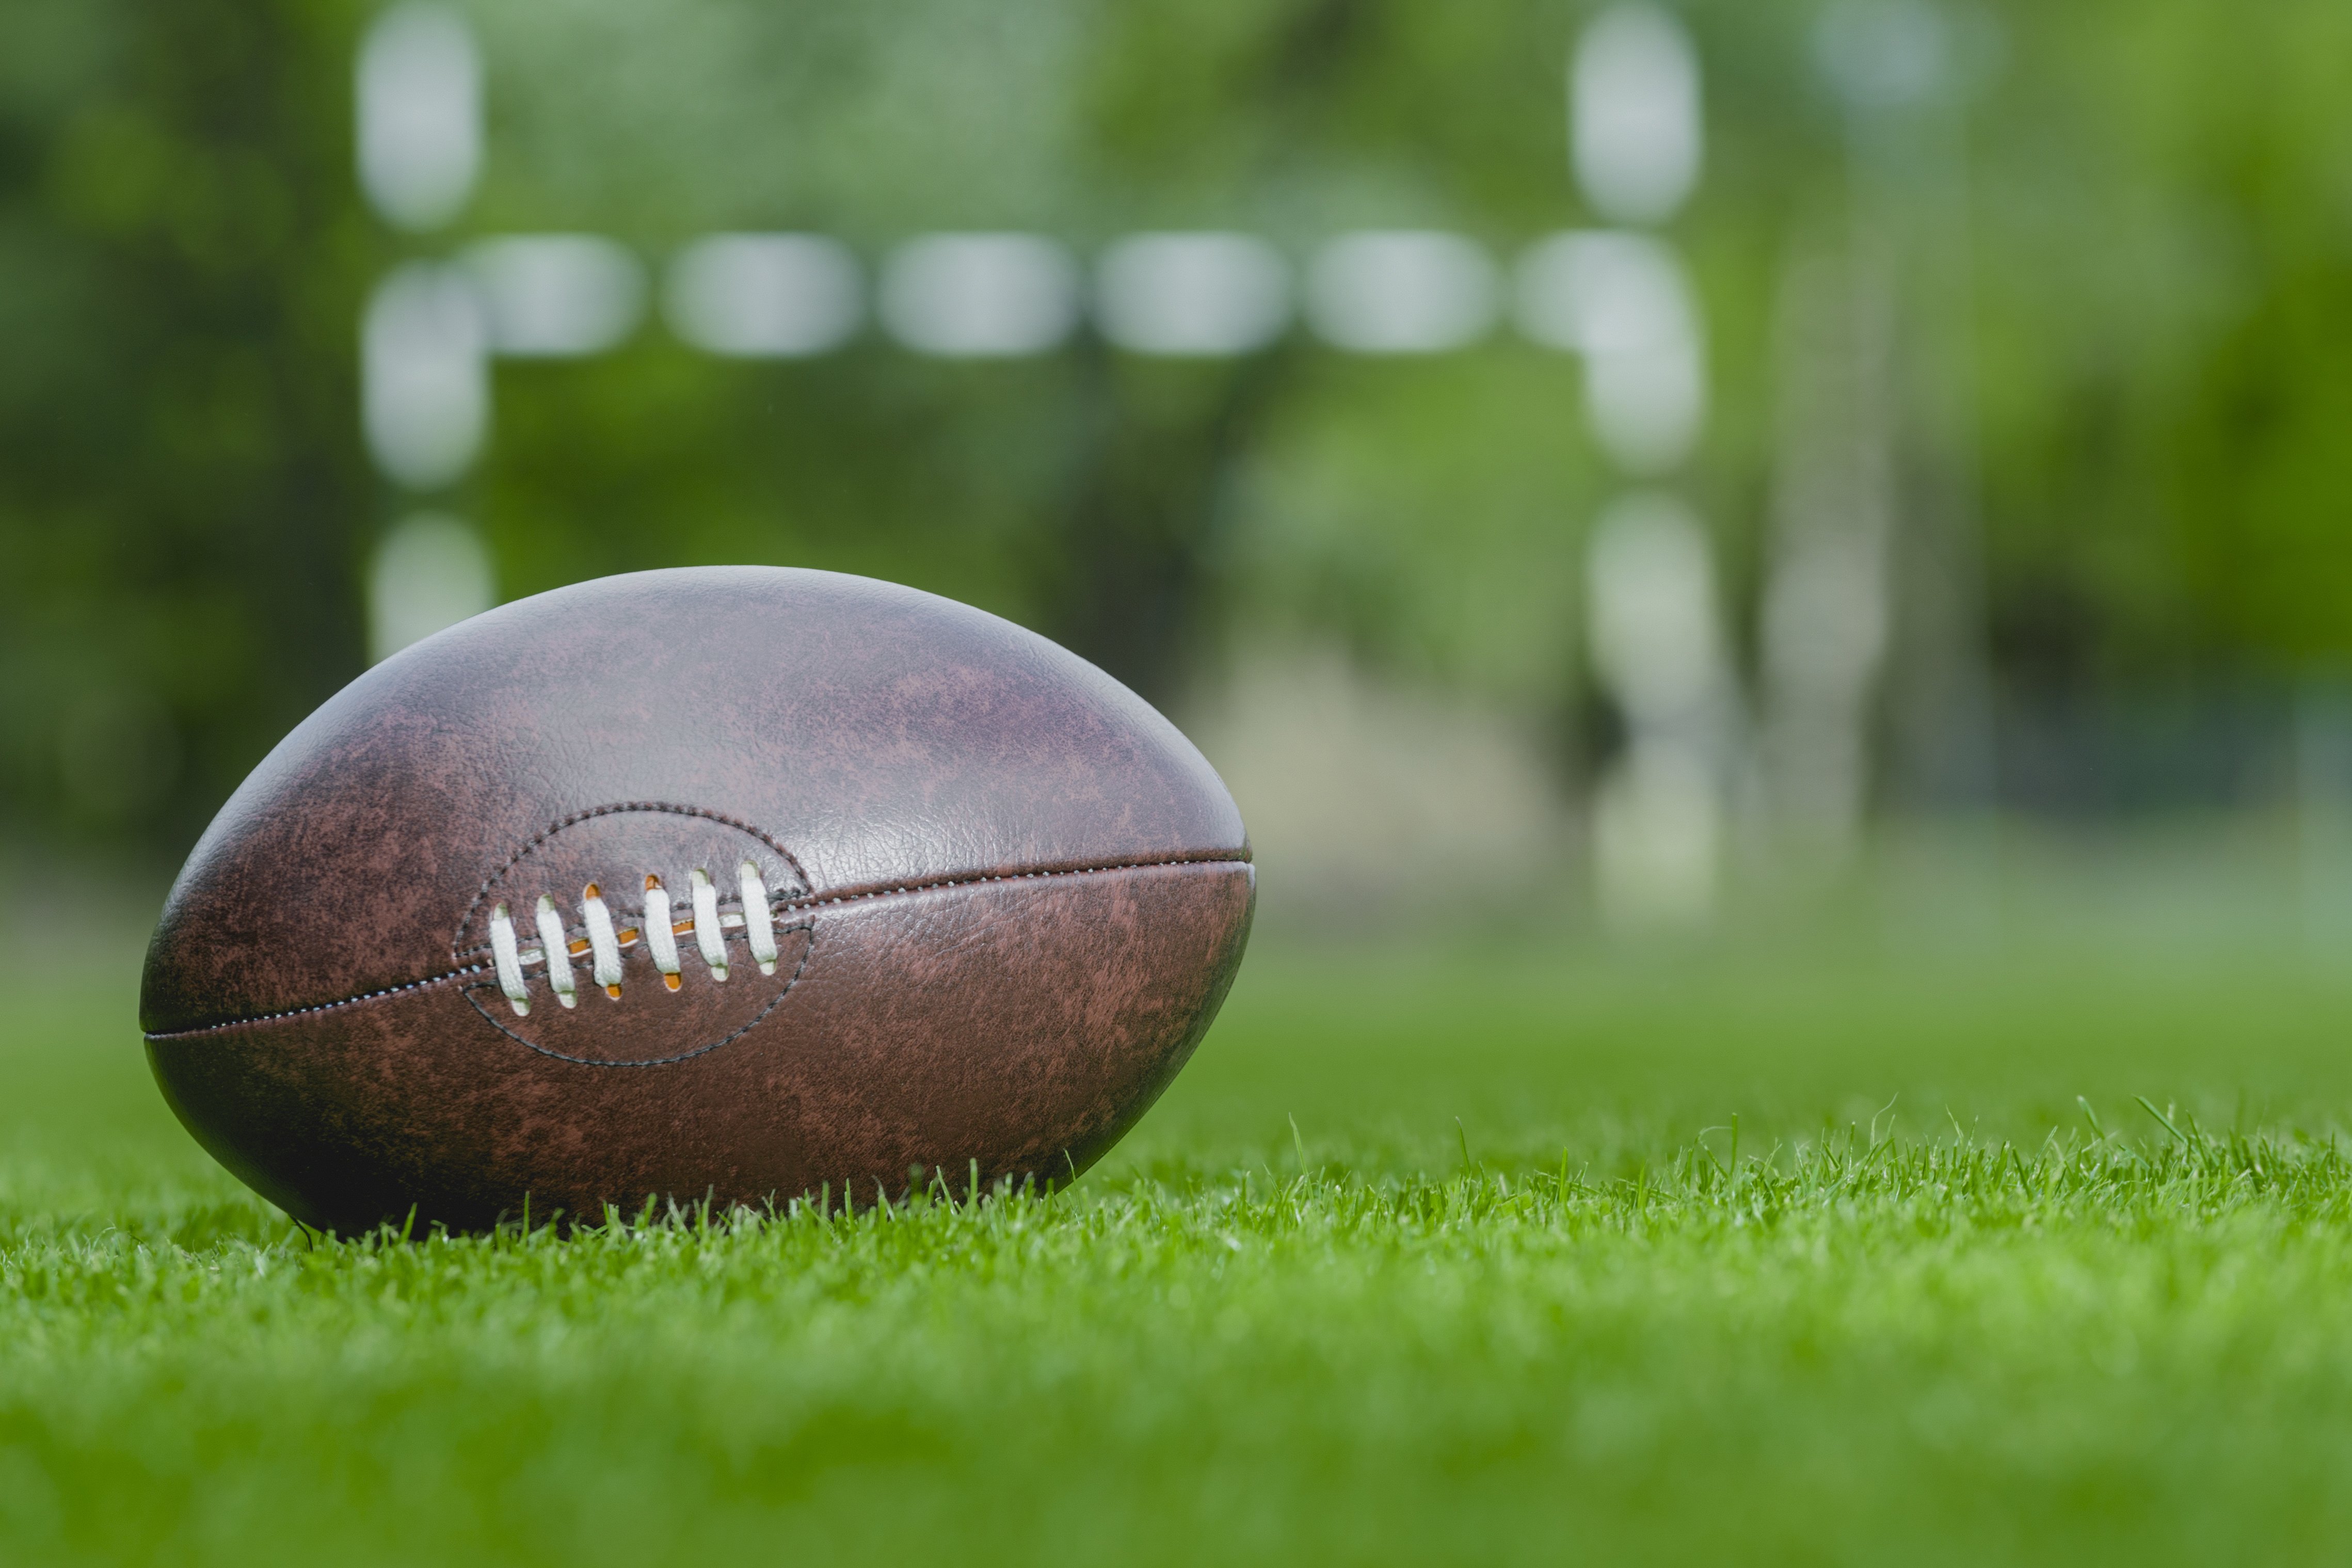 American football, rugby ball on a green grass field background. | Photo: Getty images